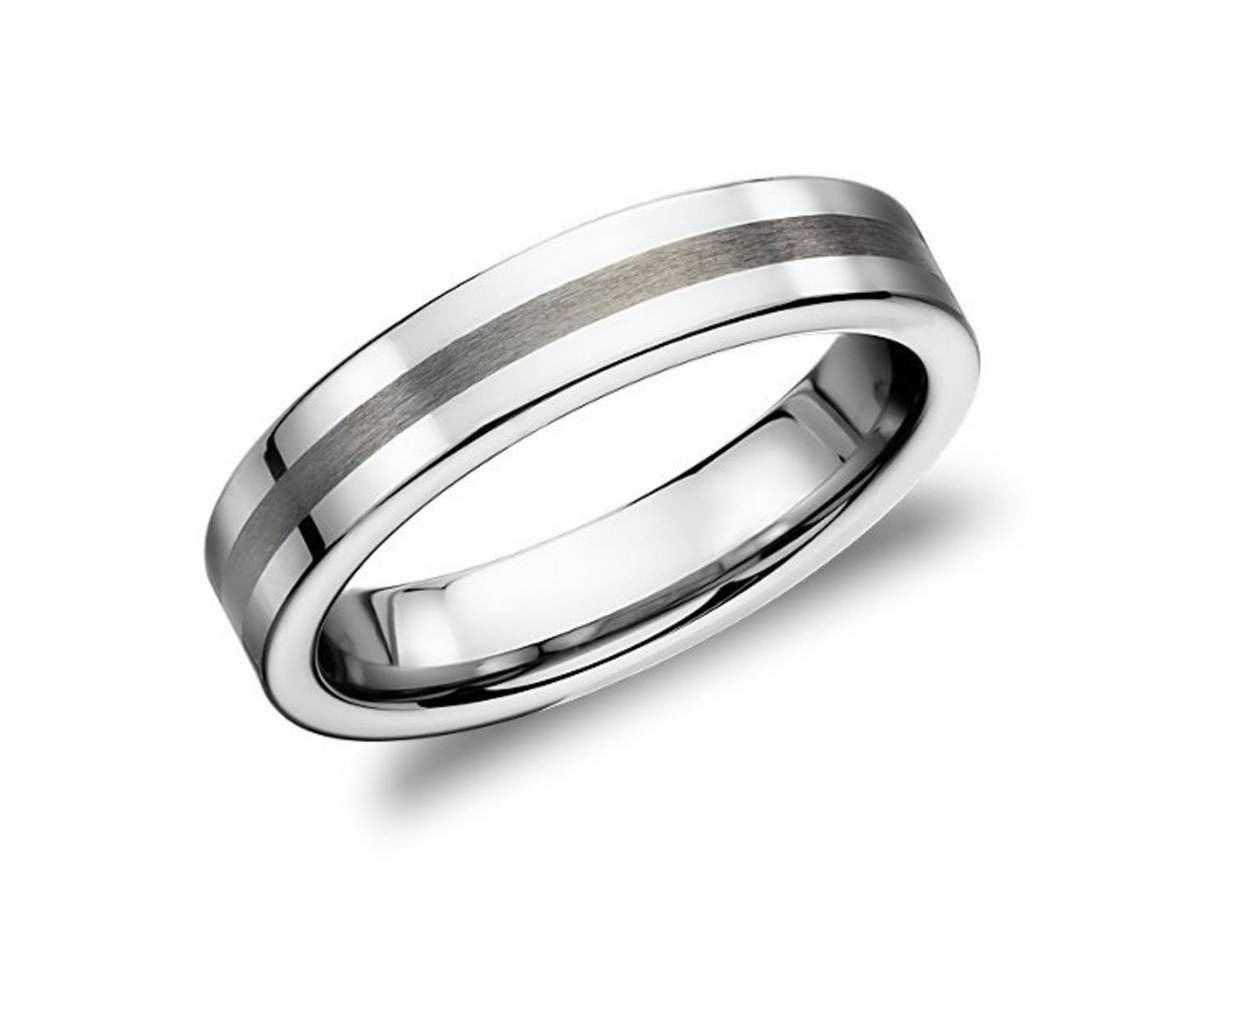 15 Men's Wedding Bands Your Groom Won't Want To Take Off | Glamour Intended For Contemporary Mens Wedding Rings (View 11 of 15)